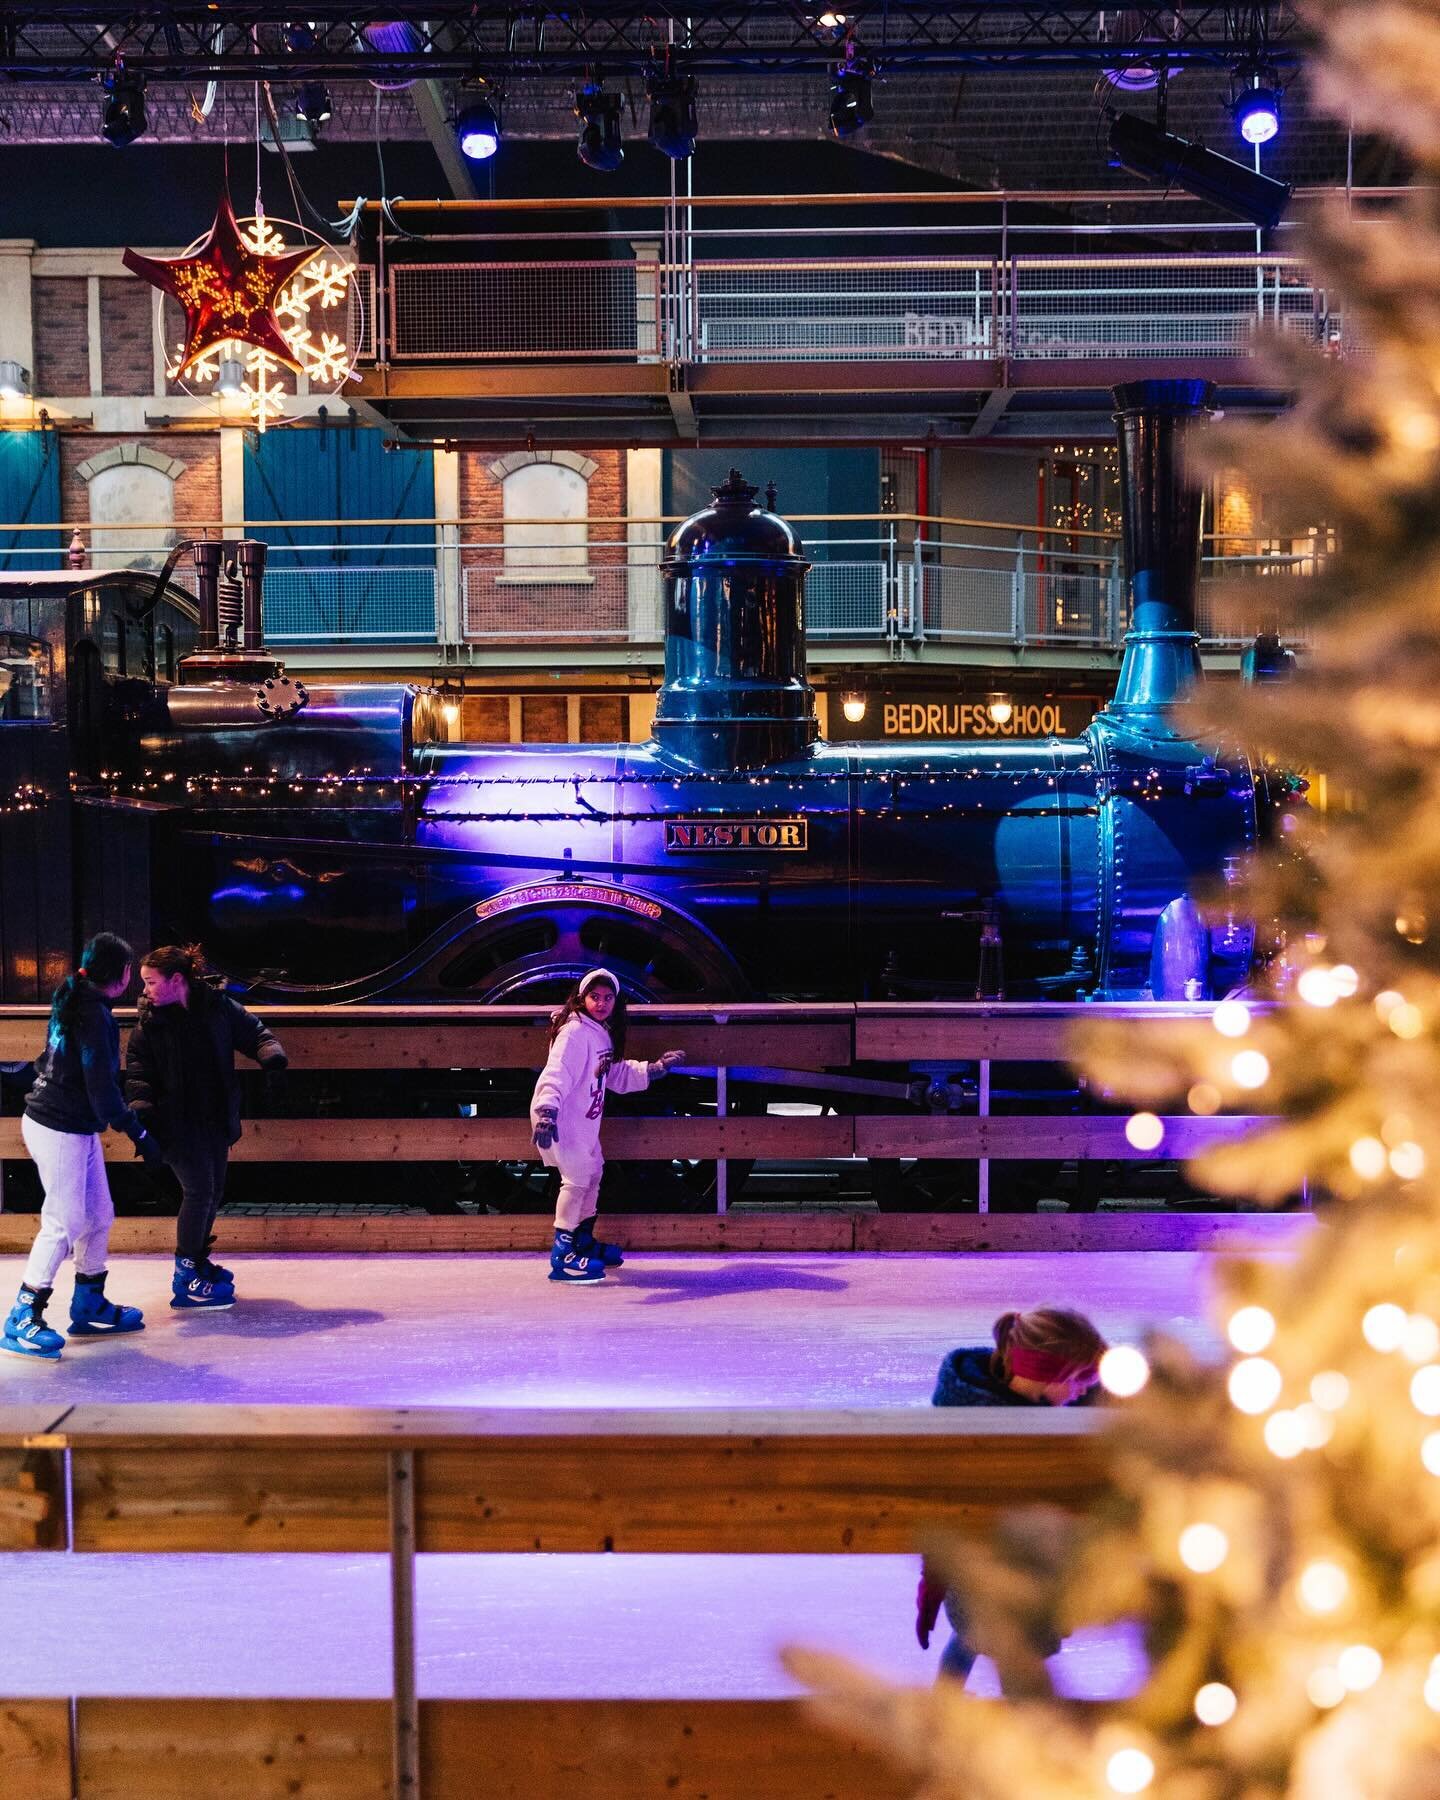 I was asked to shoot &lsquo;Winter Station&rsquo; for @spoorwegmuseum recently. A winter wonderland for young and old to enjoy during the Christmas holidays. Swipe for an impression ⛸️🎄